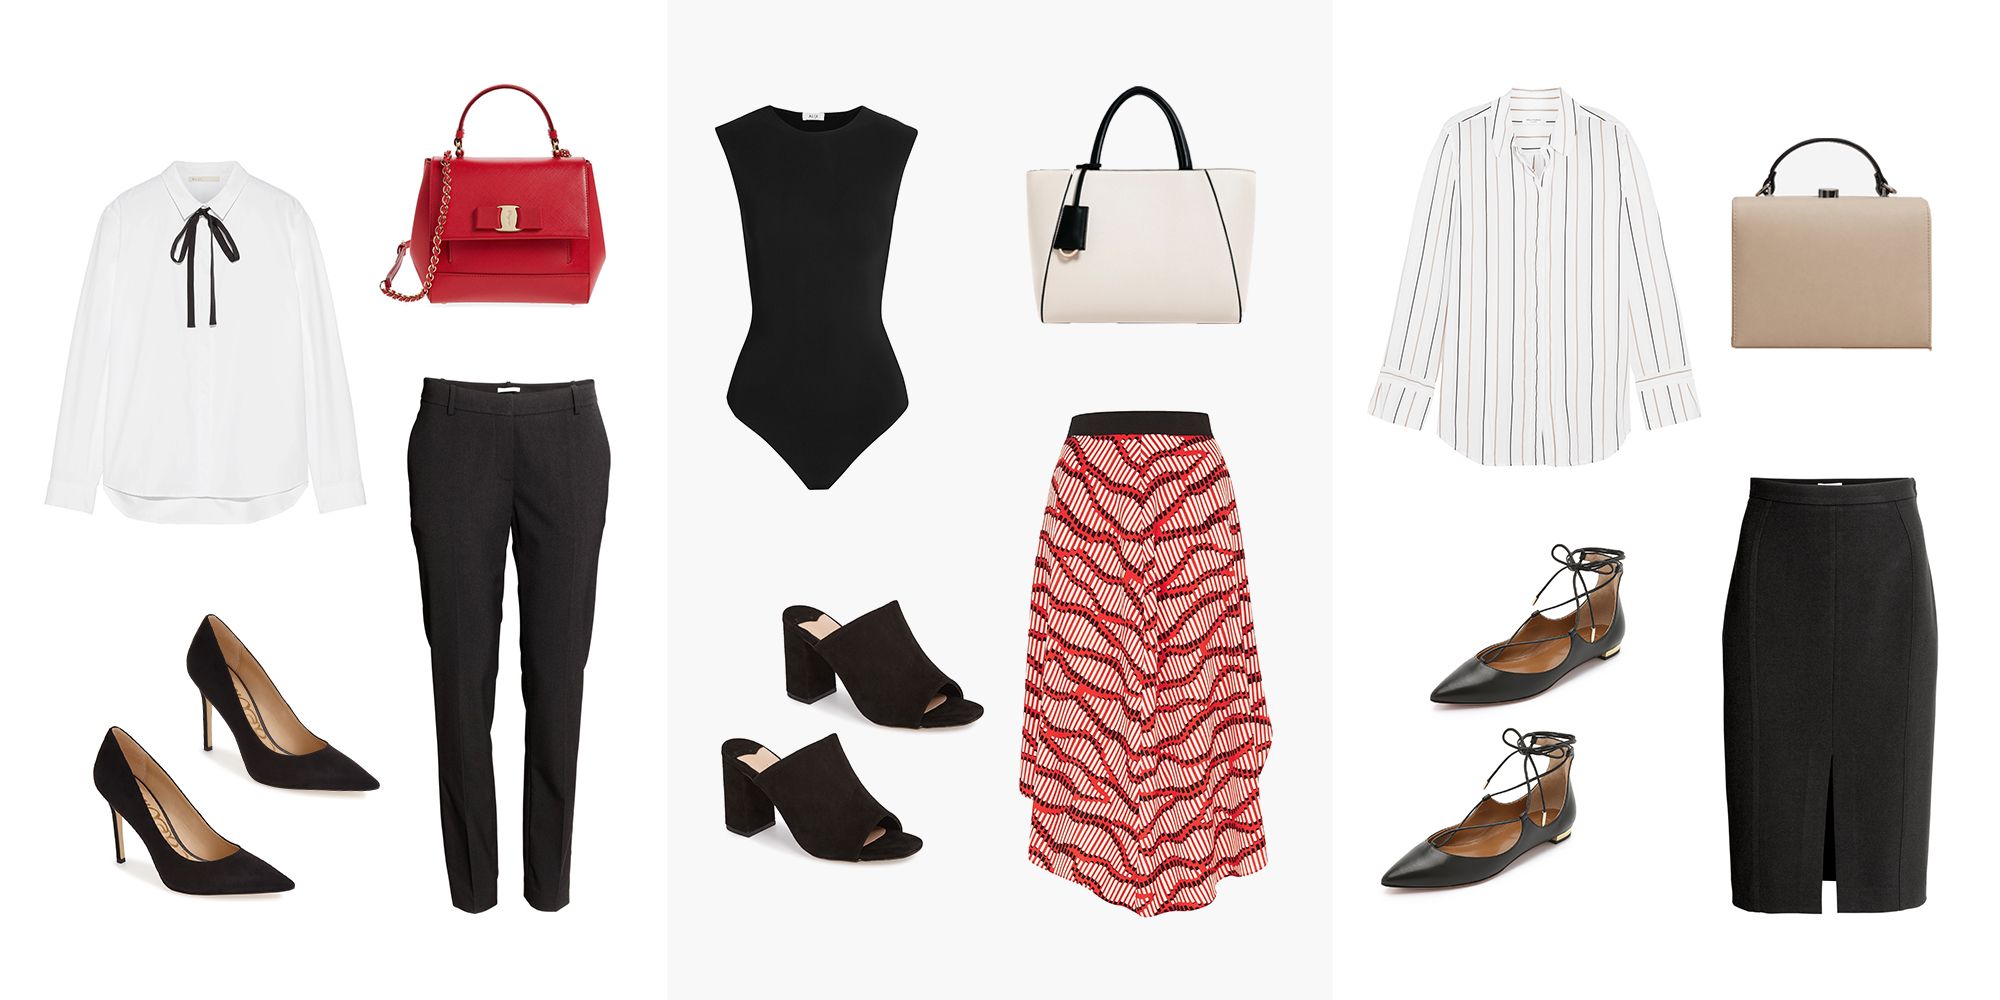 What to Wear to an Interview - 5 Best Interview Outfit Ideas for Women